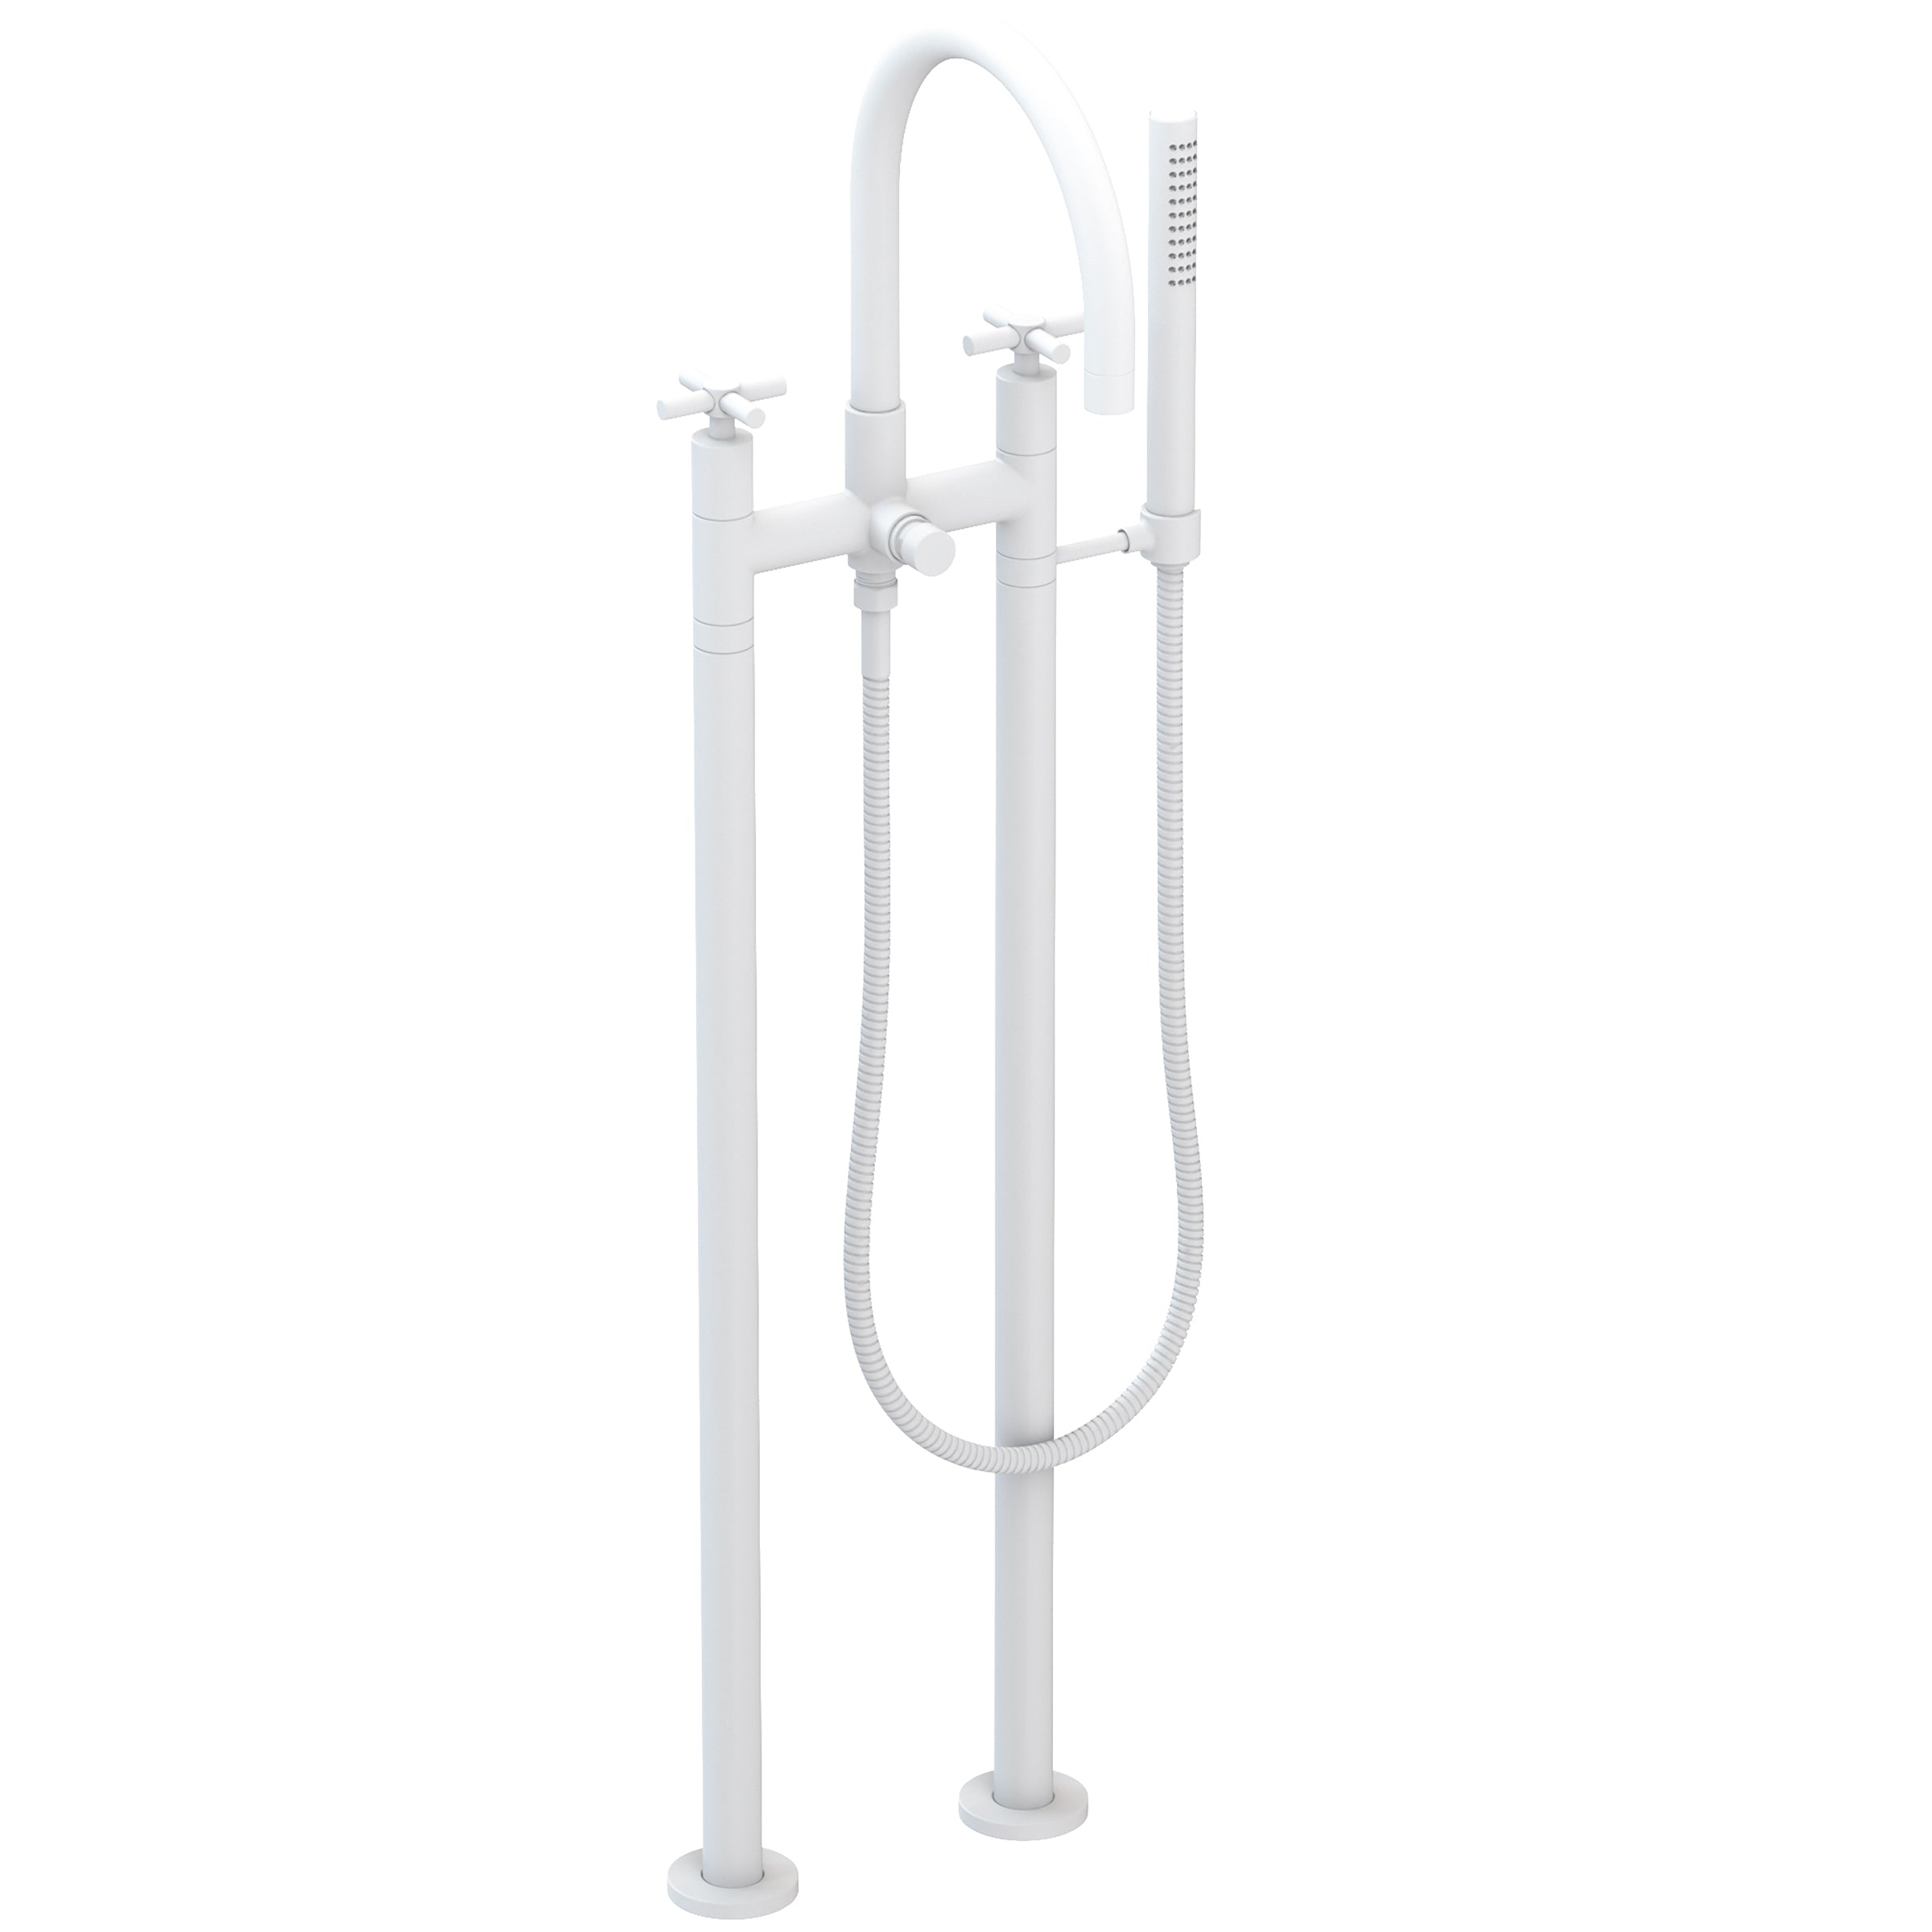 Newport Brass East Linear Exposed Tub & Hand Shower Set w/Risers